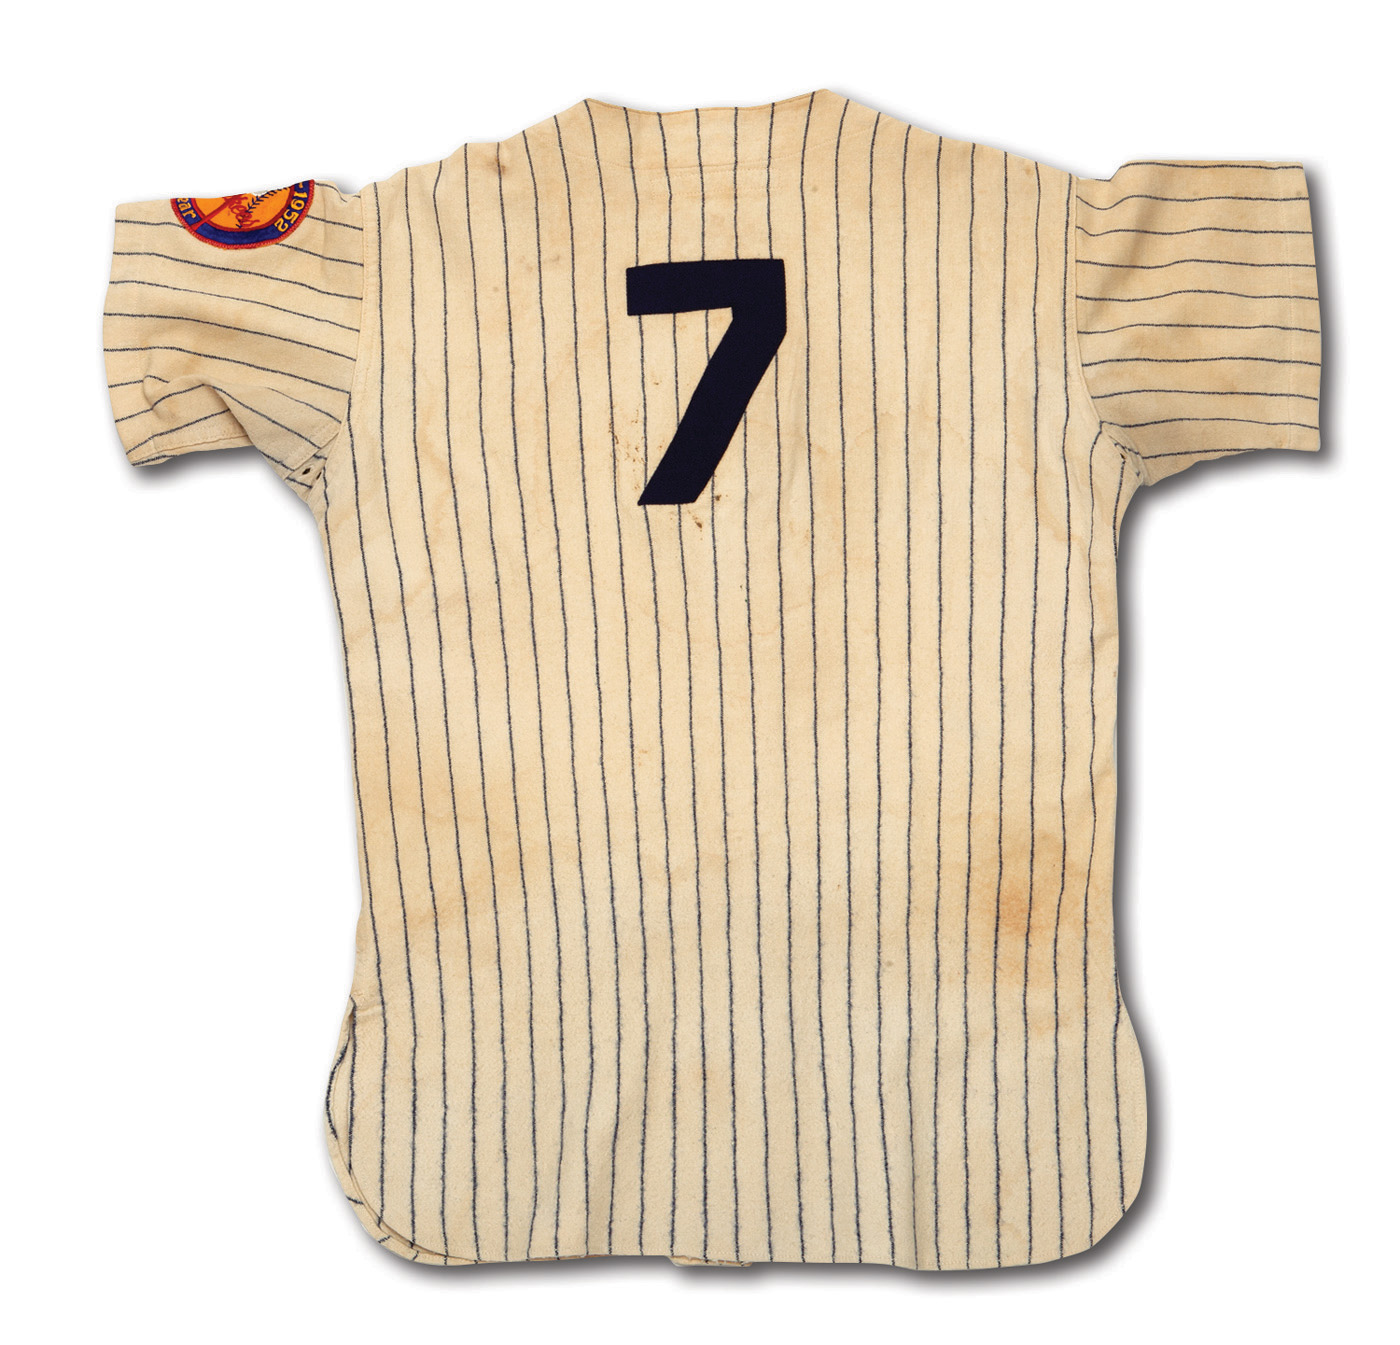 Magnificent Mickey Mantle Signed New York Yankees Uniform Jersey